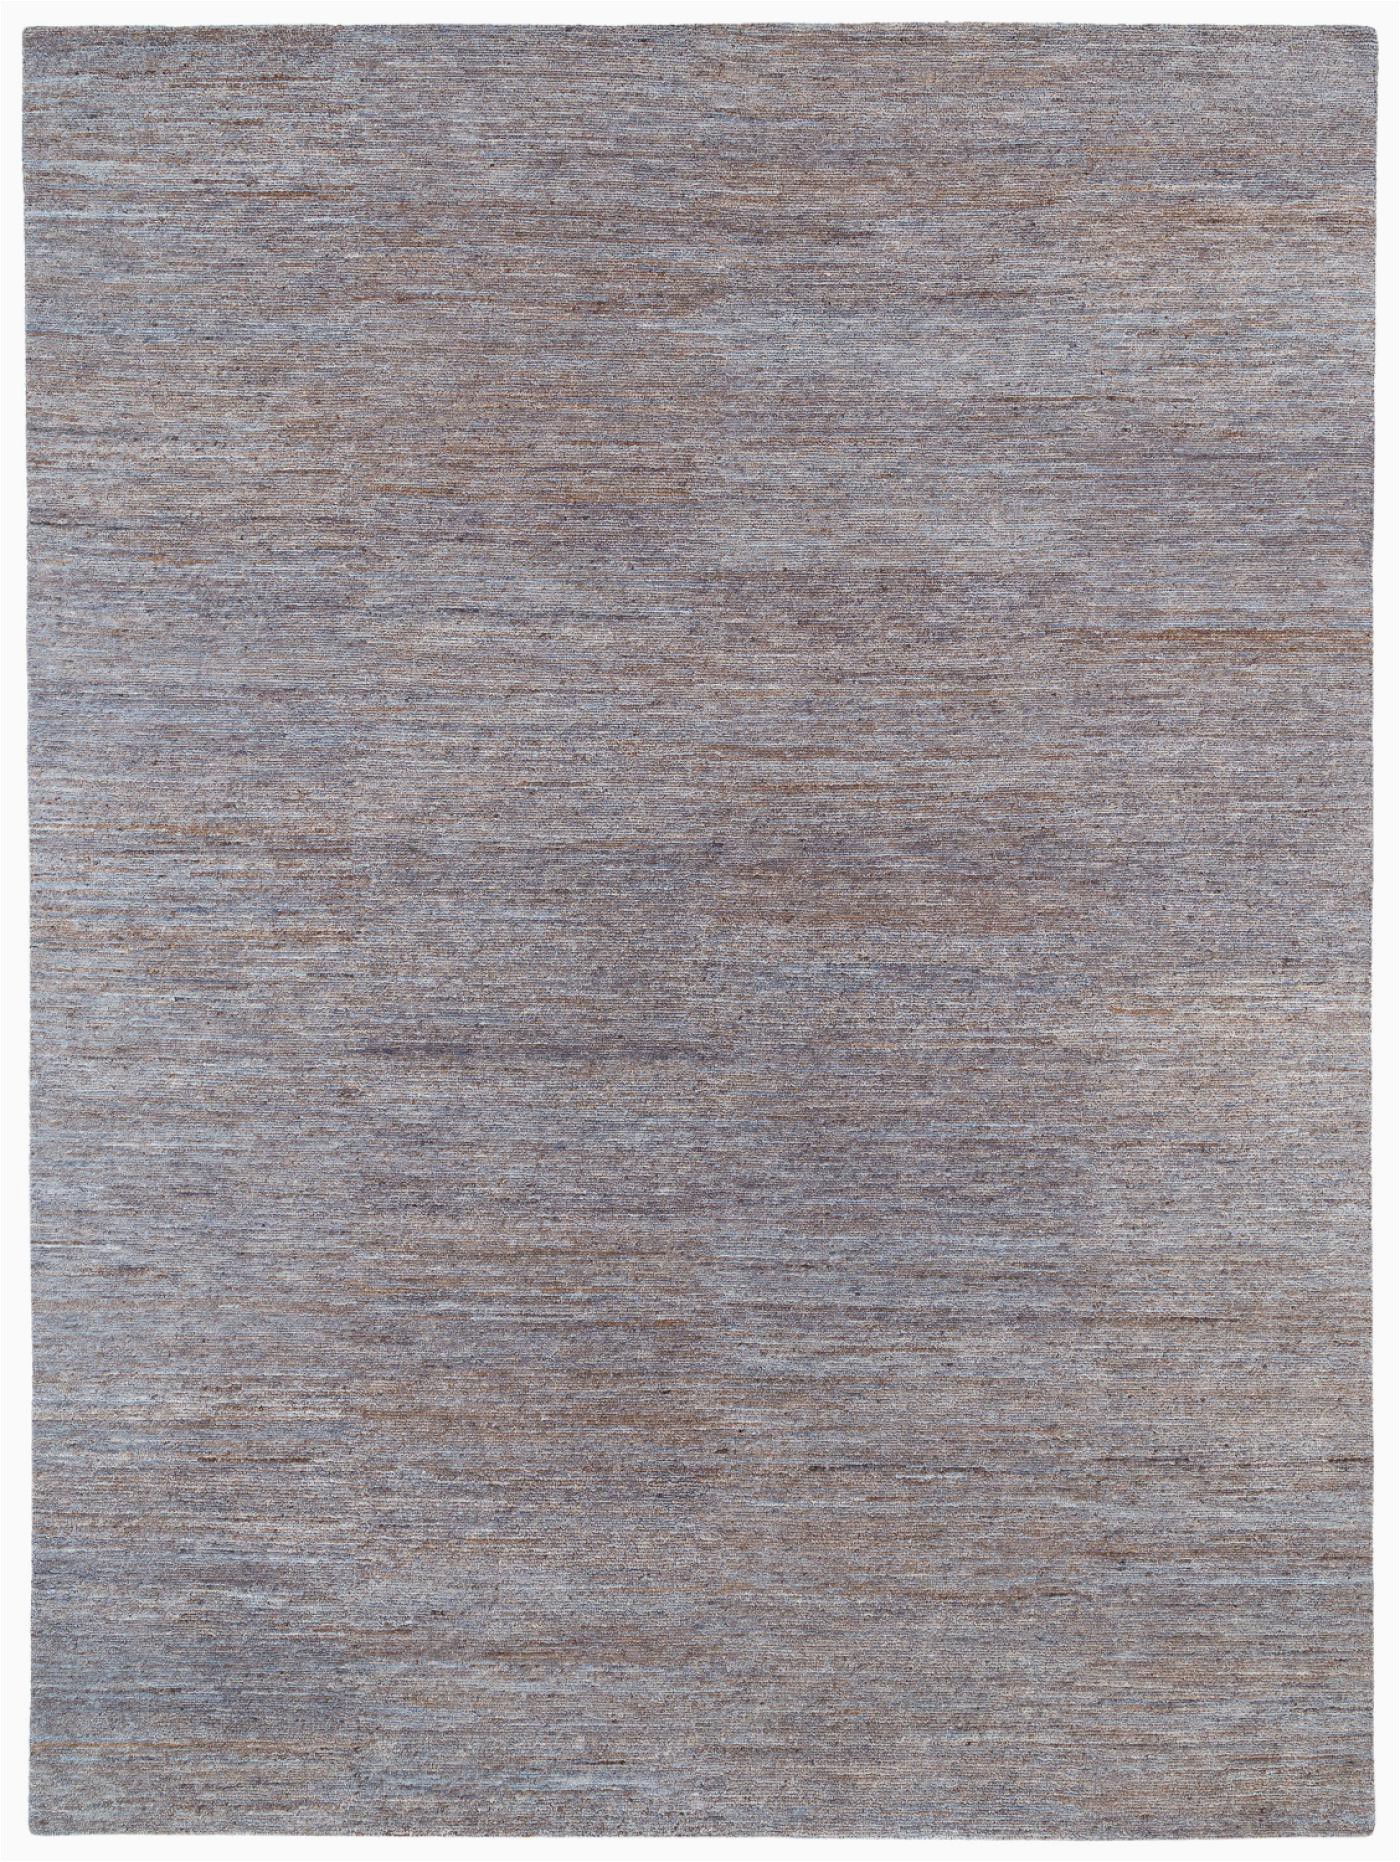 Solid Color area Rugs 9×12 Joseph Carini Contemporary Textured solid Wool area Rug 9 X12